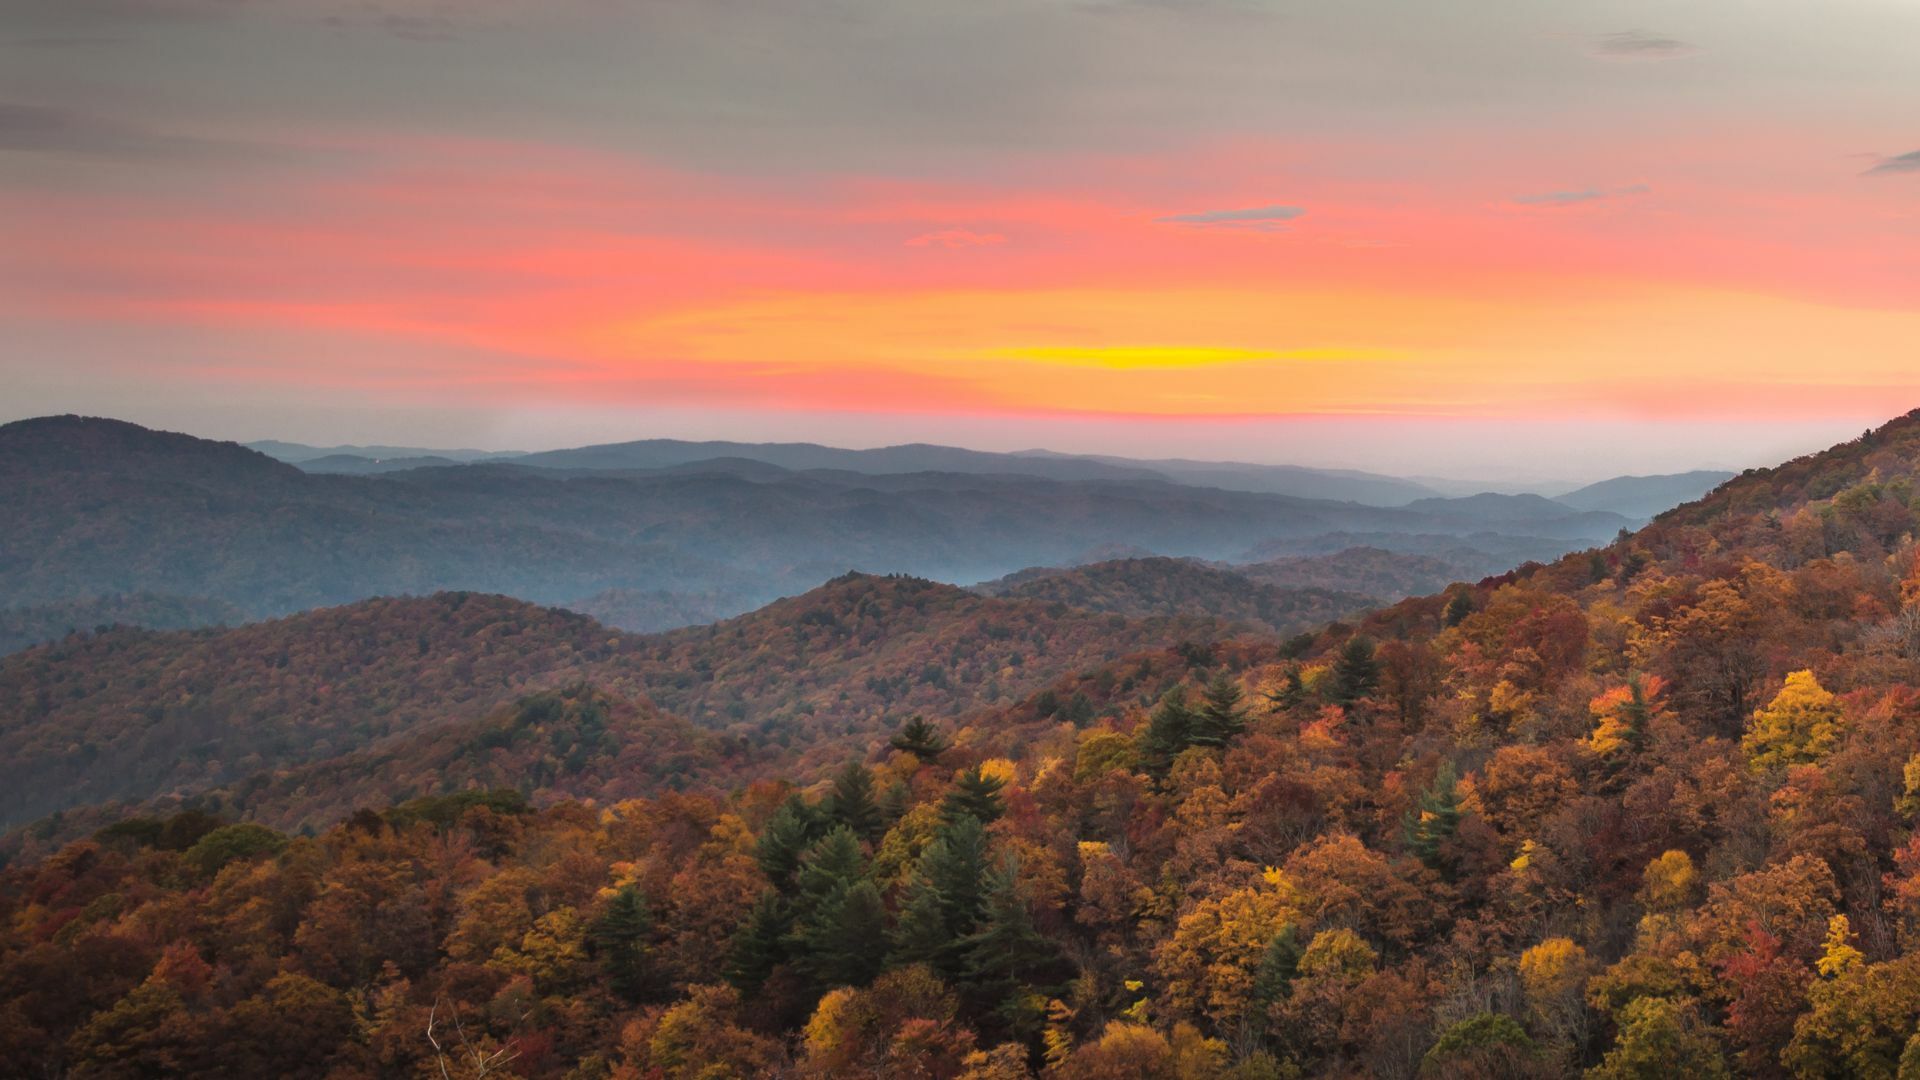 Best Places to Hike/See Sunset in Blue Ridge Mountains Near Winston-Salem